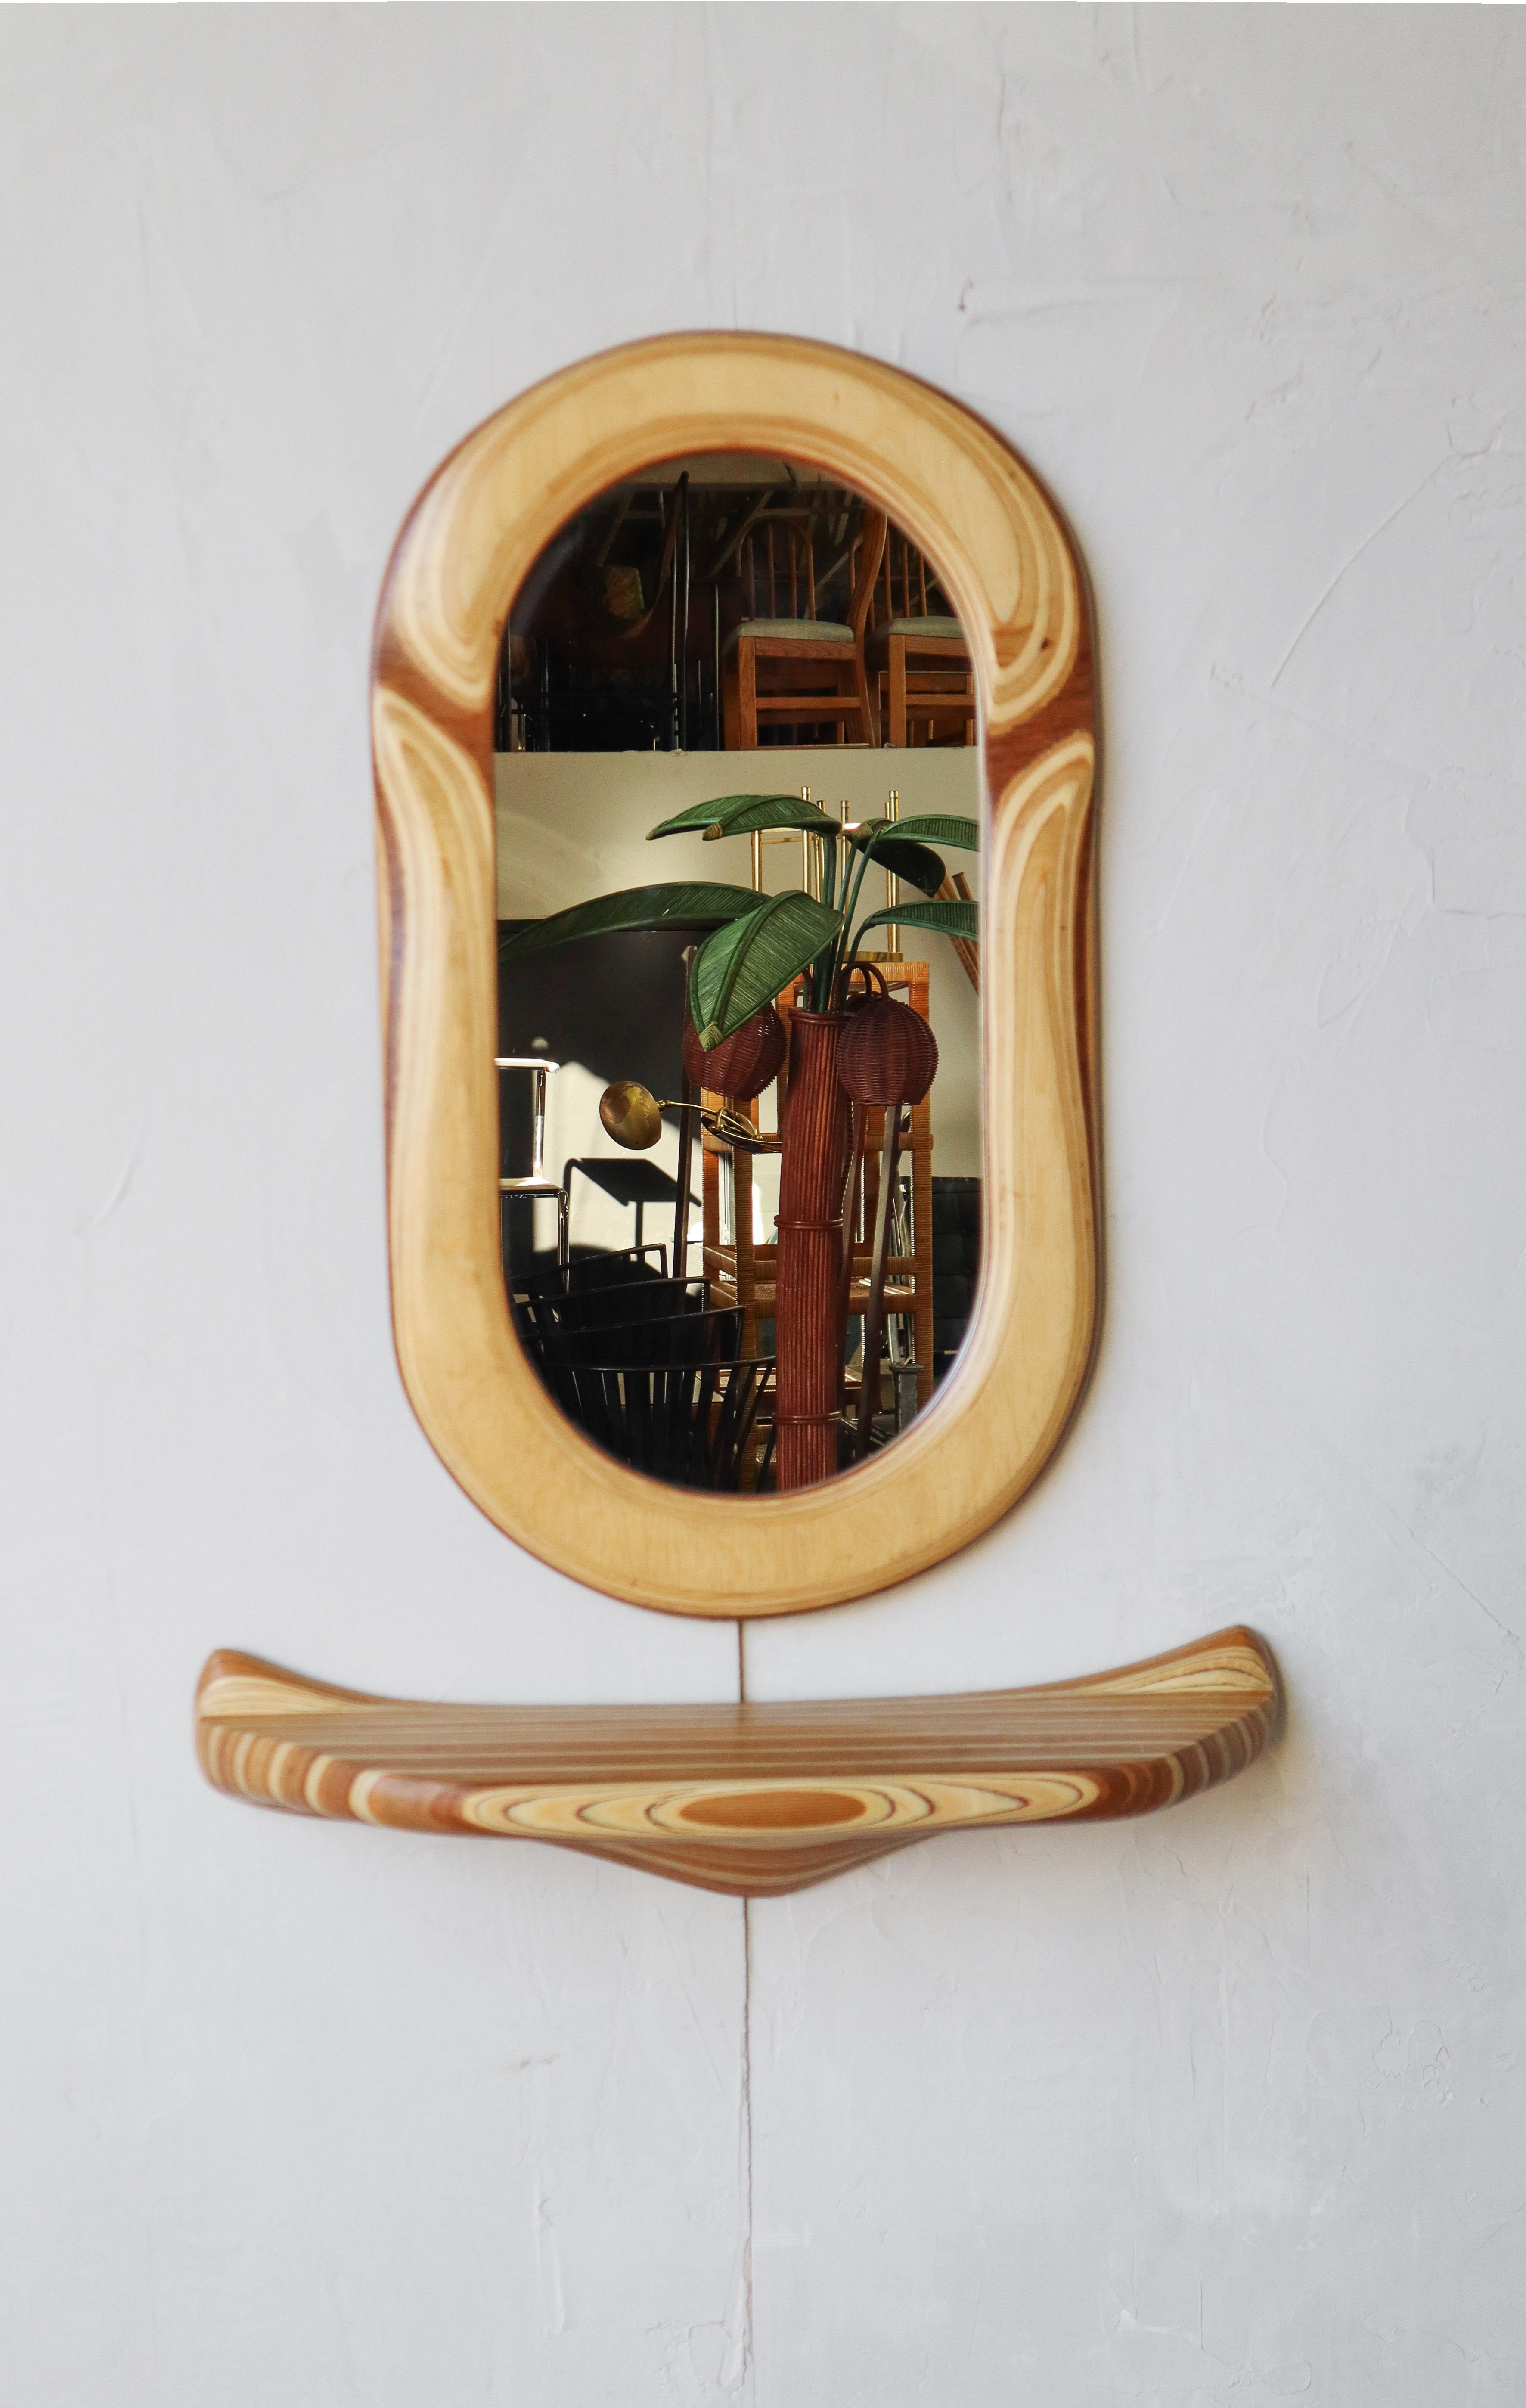 Unique molded plywood mirror and shelf set. Beautiful and organic. 

No damage to be noted.

Mirror dimensions: 28